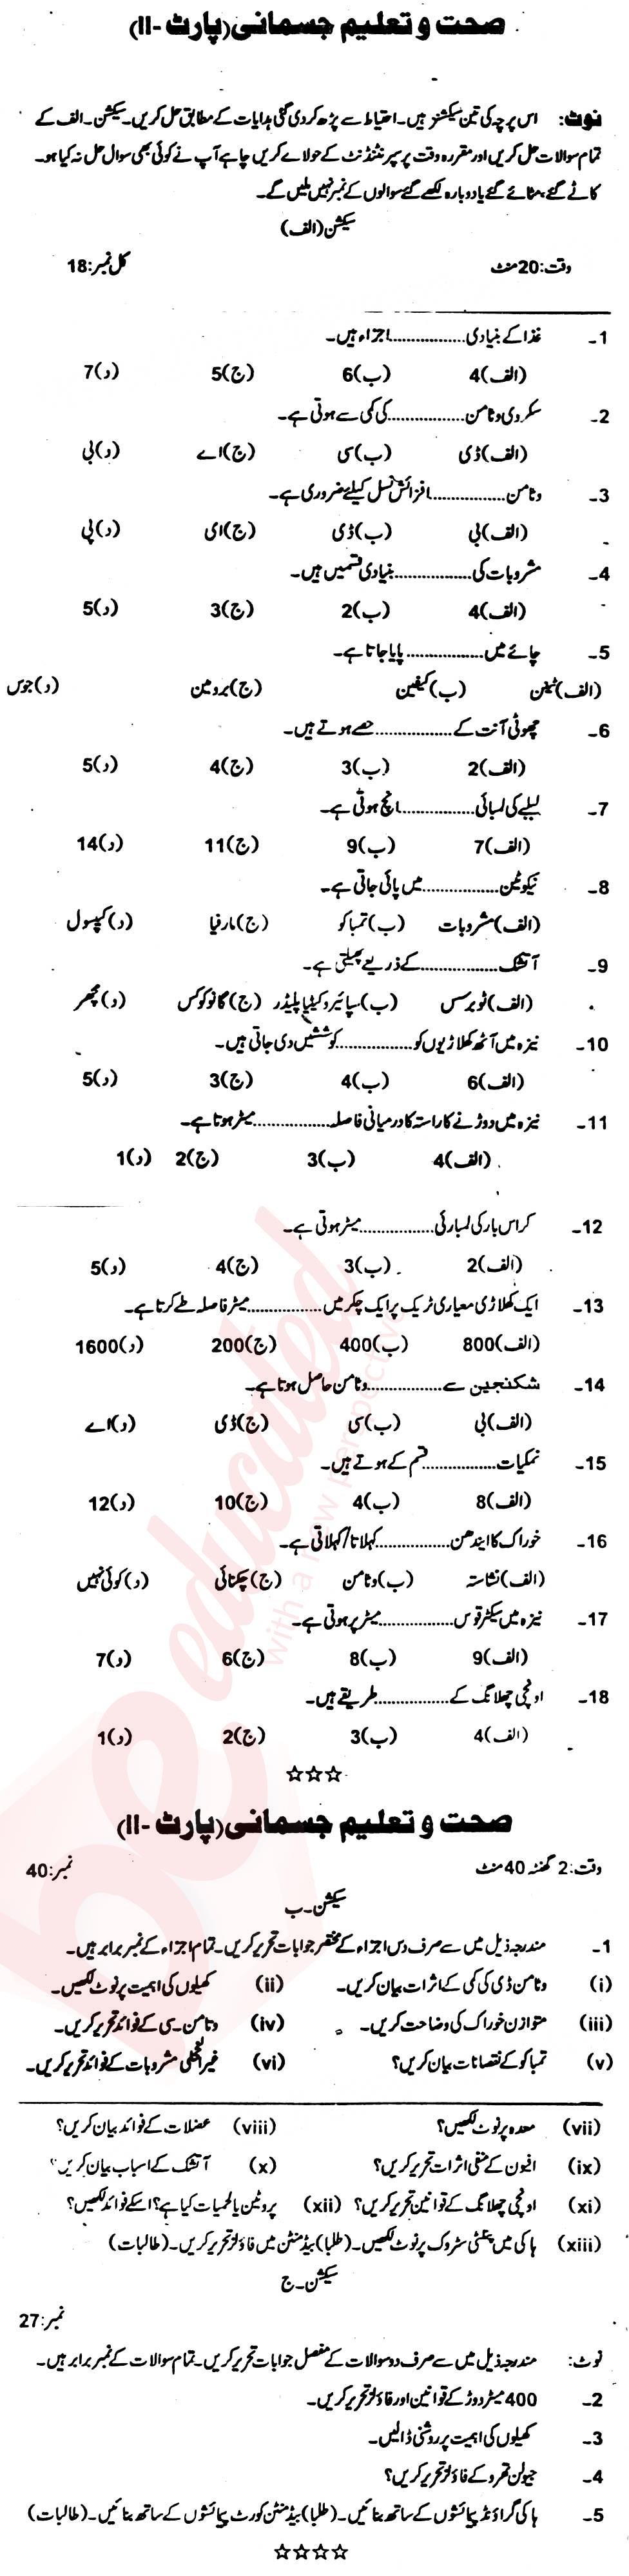 Health and Physical Education FA Part 2 Past Paper Group 1 BISE Abbottabad 2014